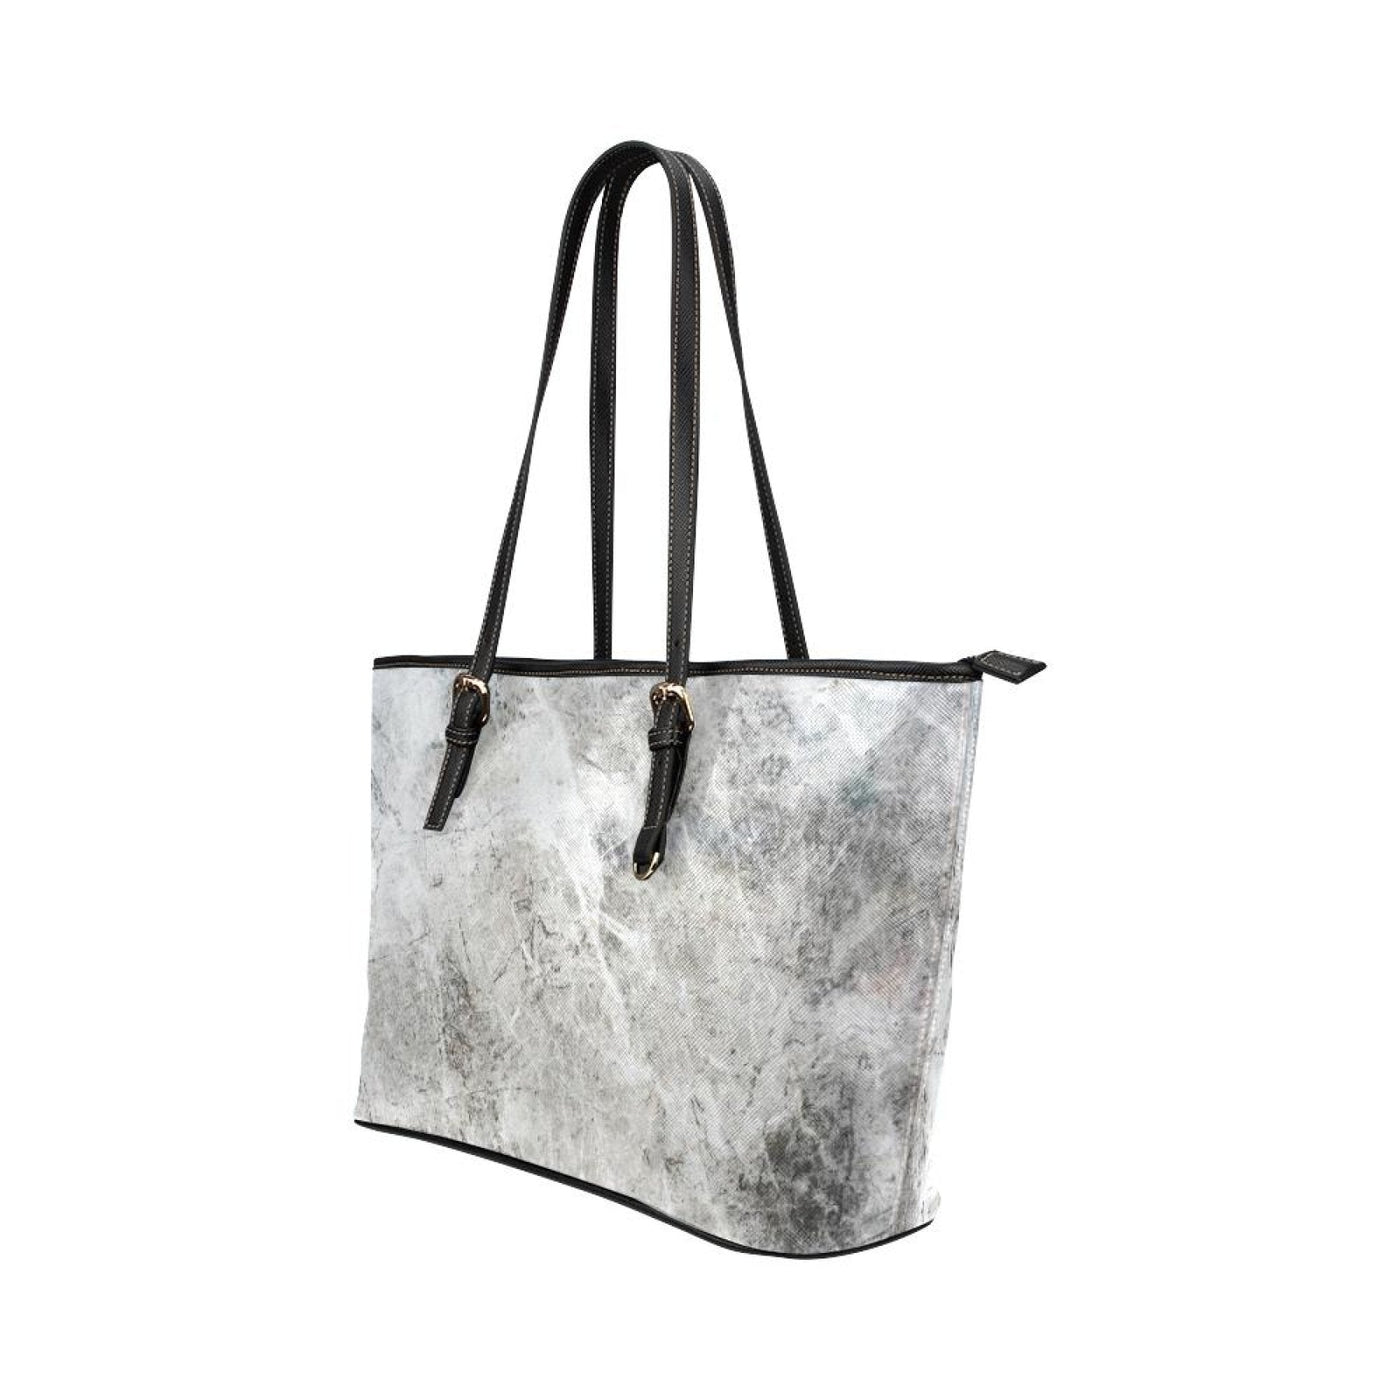 Large Leather Tote Shoulder Bag - Gray And White Marble Handbag - Bags | Leather